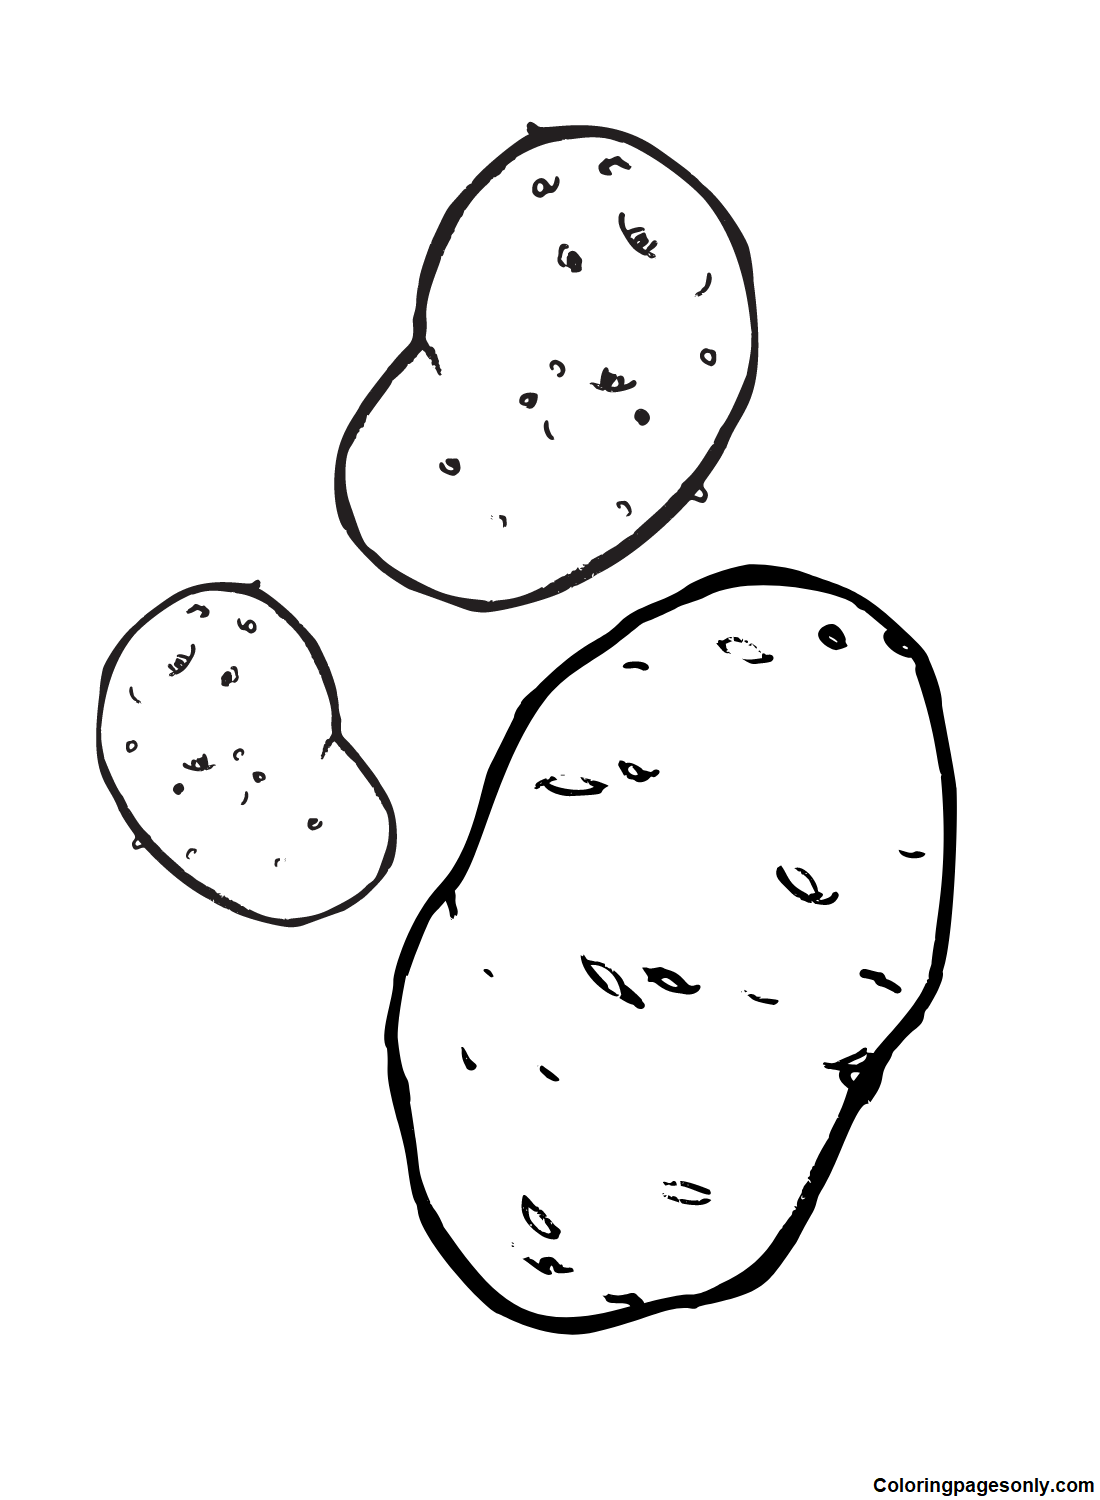 Green Potatoes Coloring Page